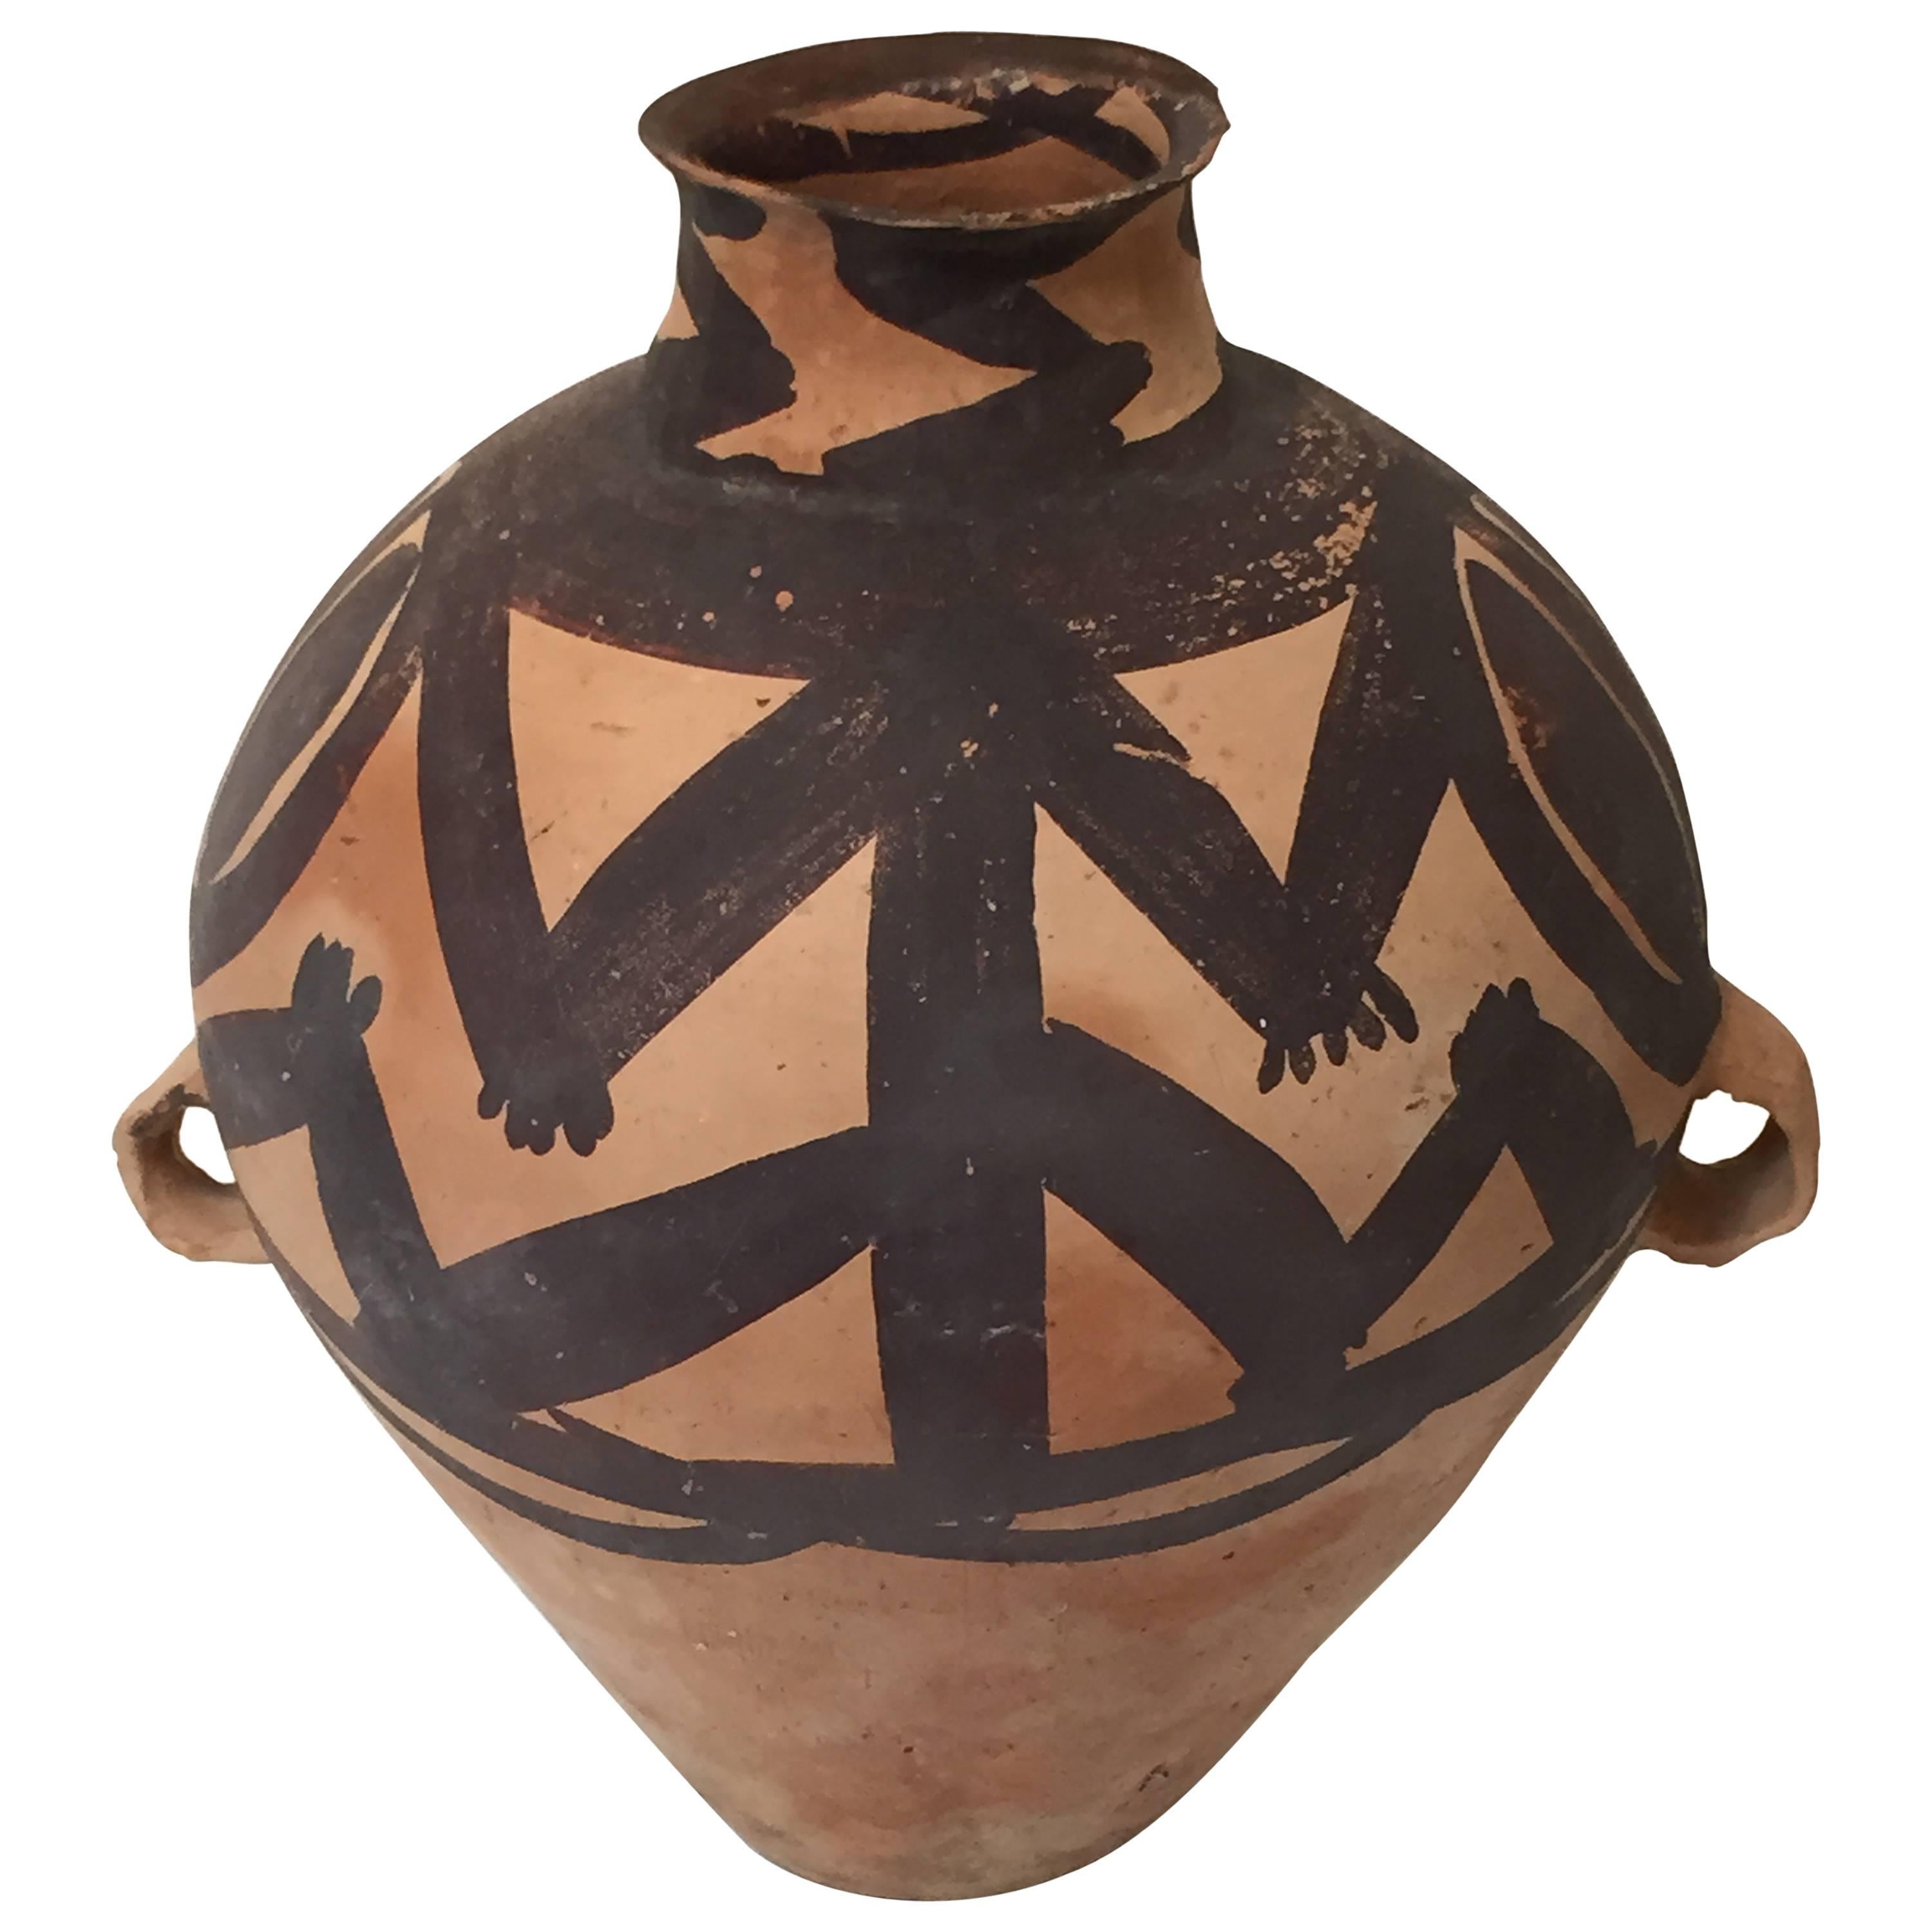 2nd Century BC Chinese Neolithic Pot with Pigments